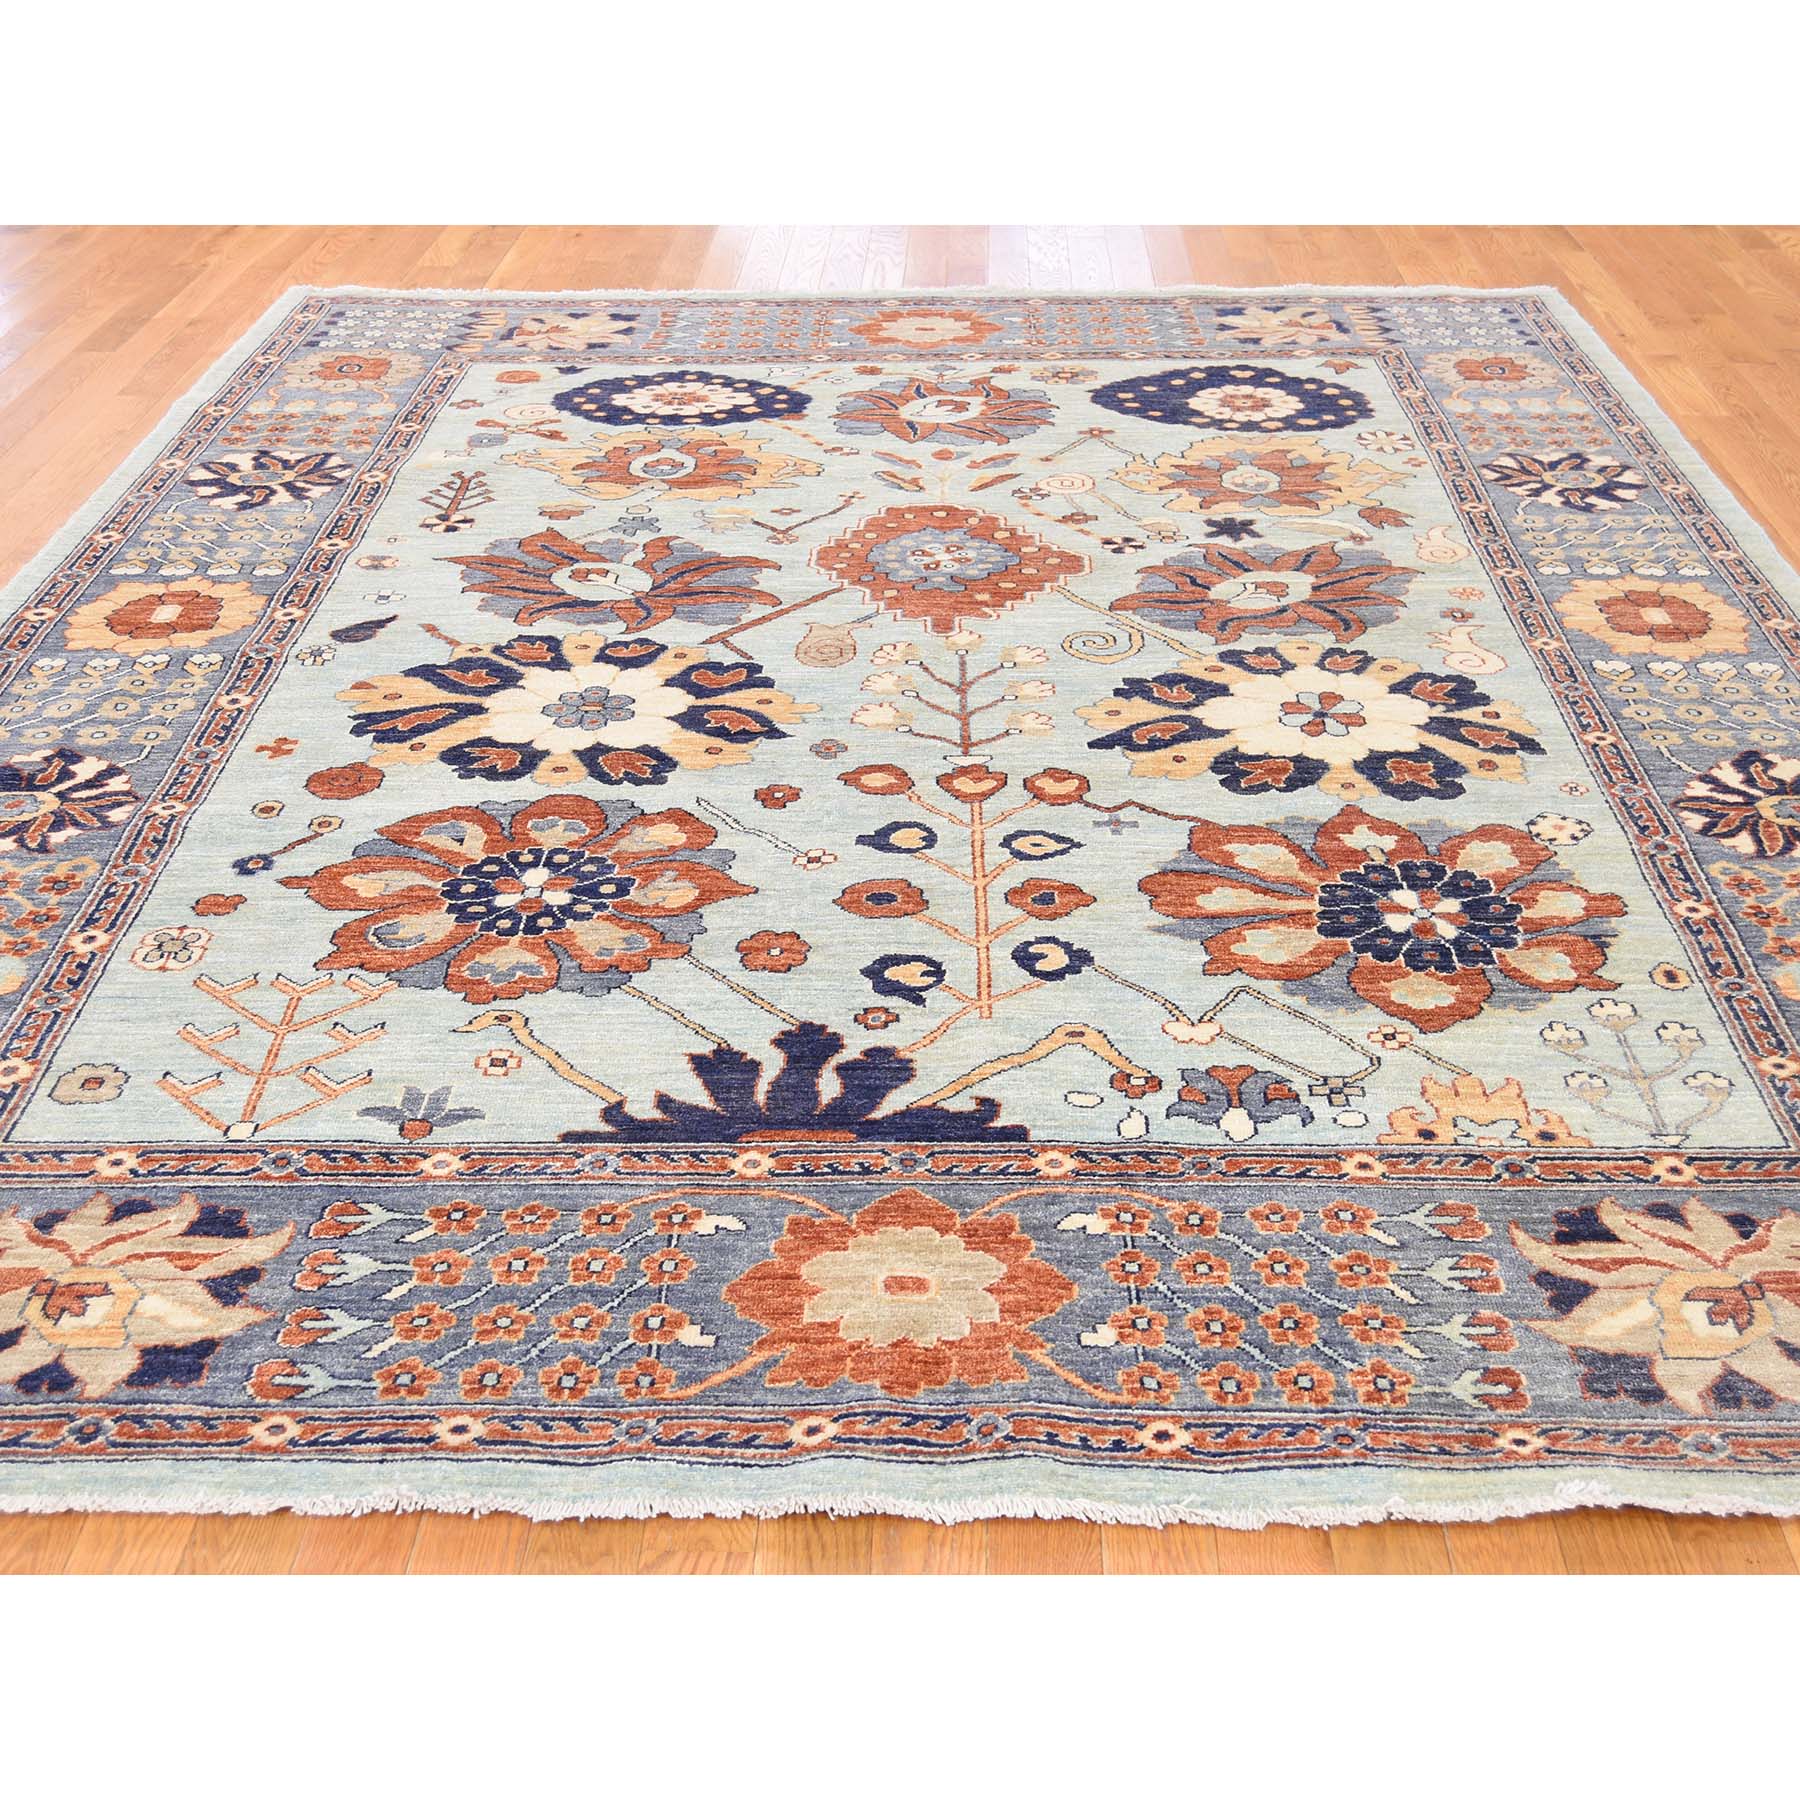 8-2--x10- Peshawar with Antiqued Sultanabad Design Hand-Knotted Oriental Rug 